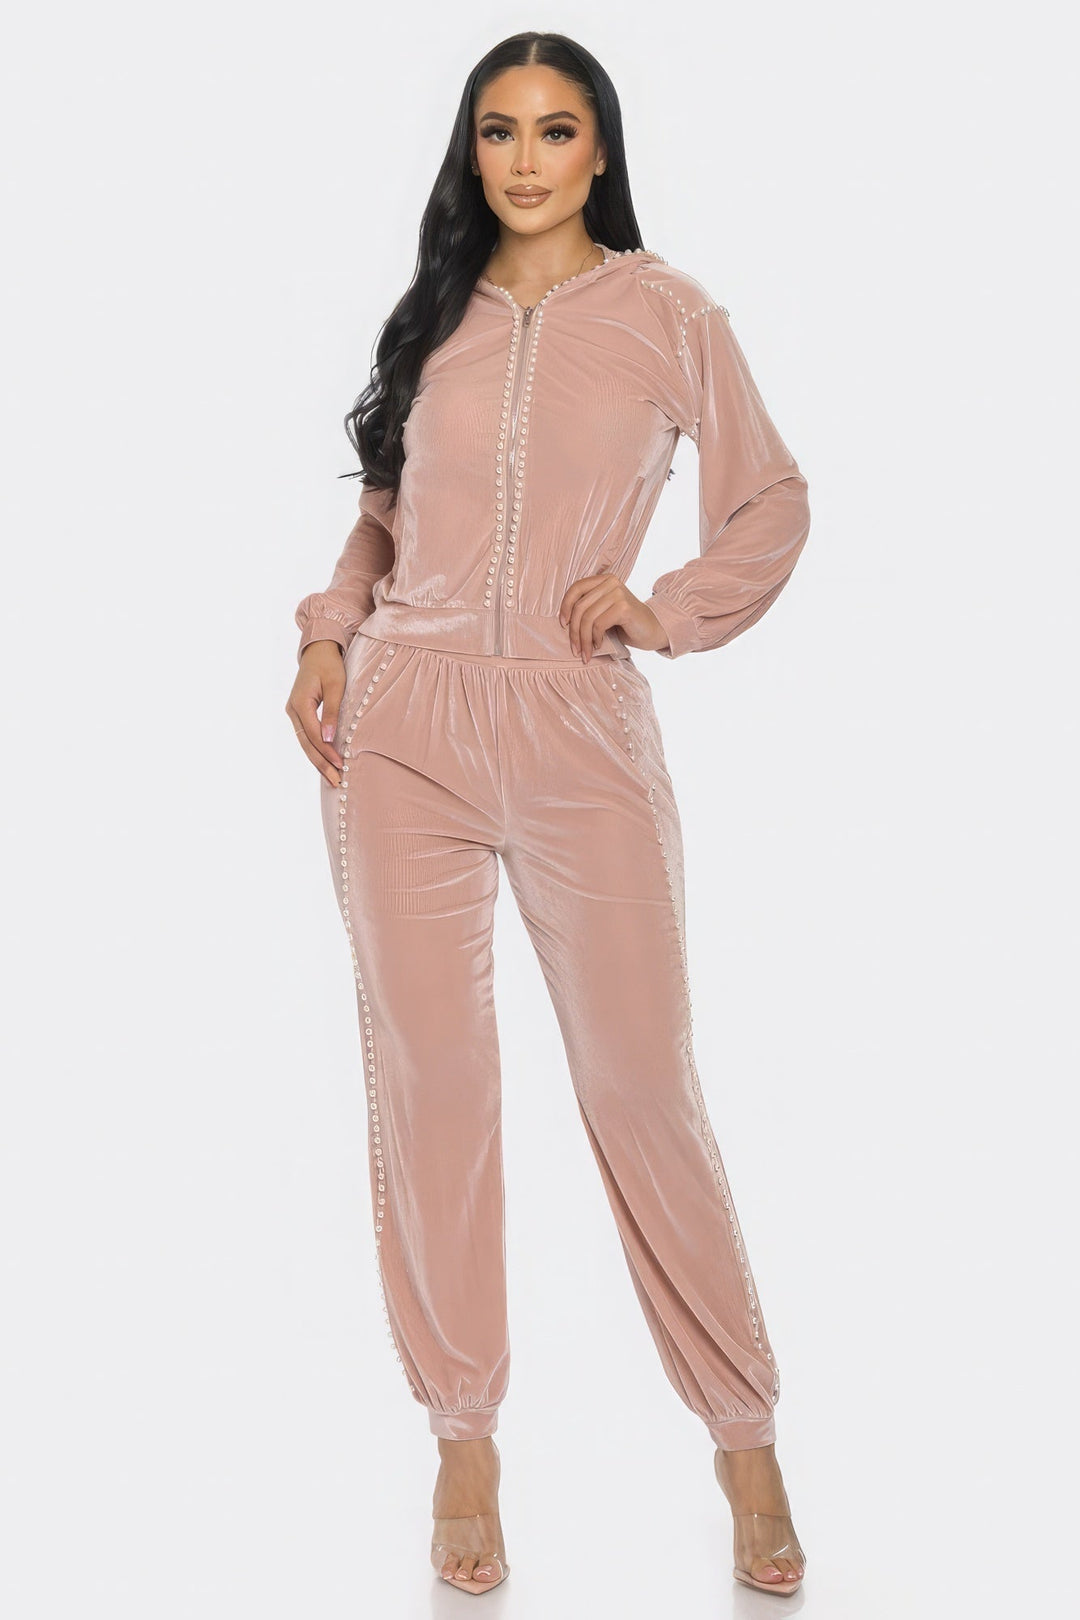 Women’s Jogger With Pearls Set - GirlSavvi